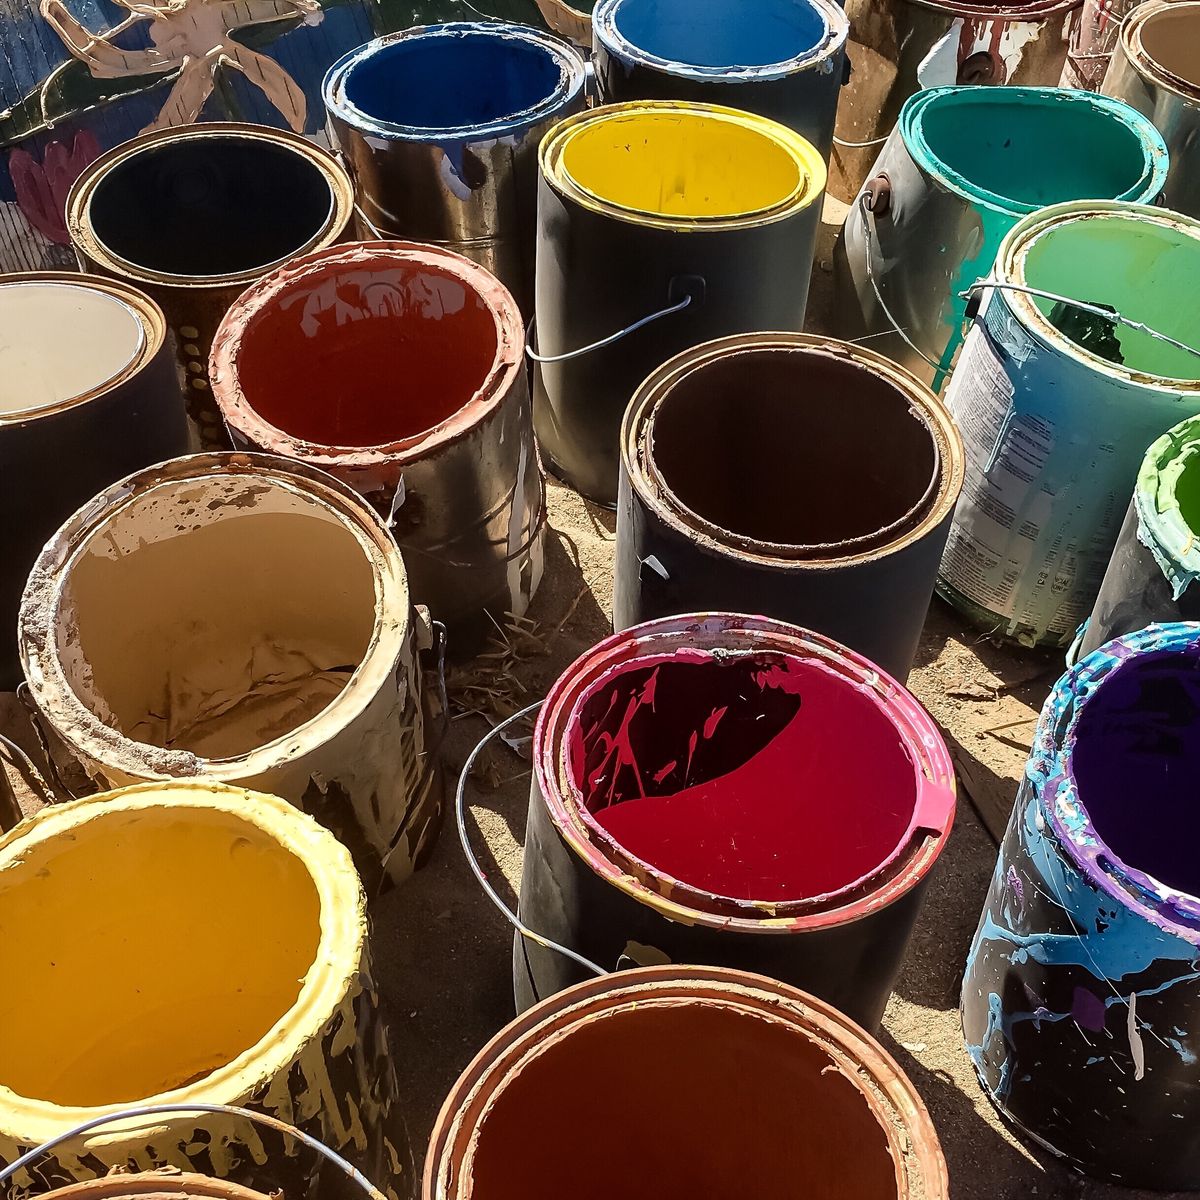 How to Safely Dispose of Paint: Oil or Latex